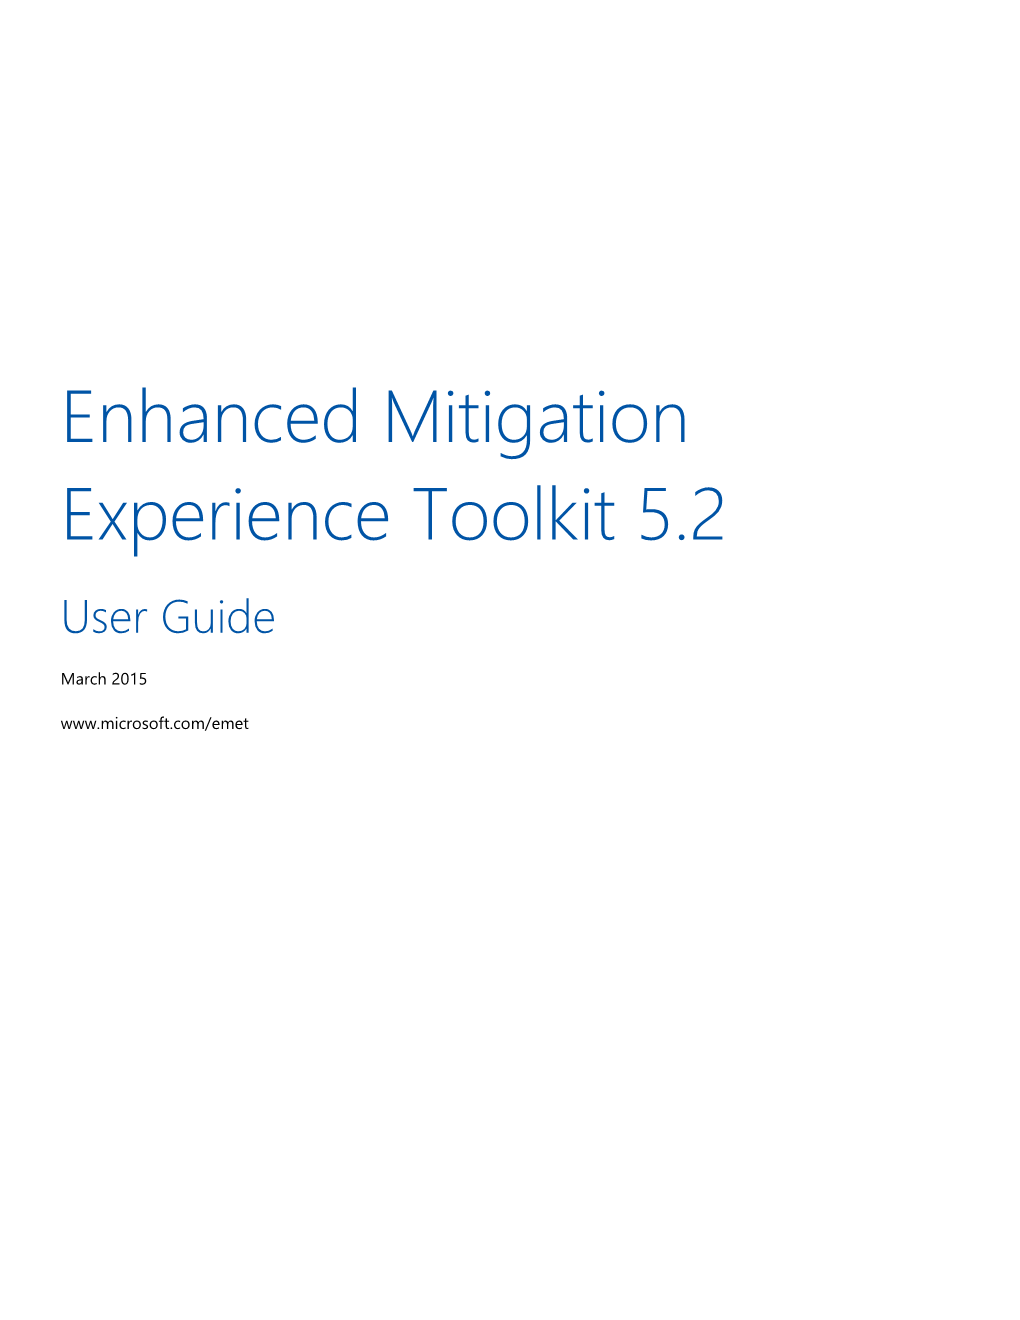 Enhanced Mitigation Experience Toolkit 5.2 User Guide